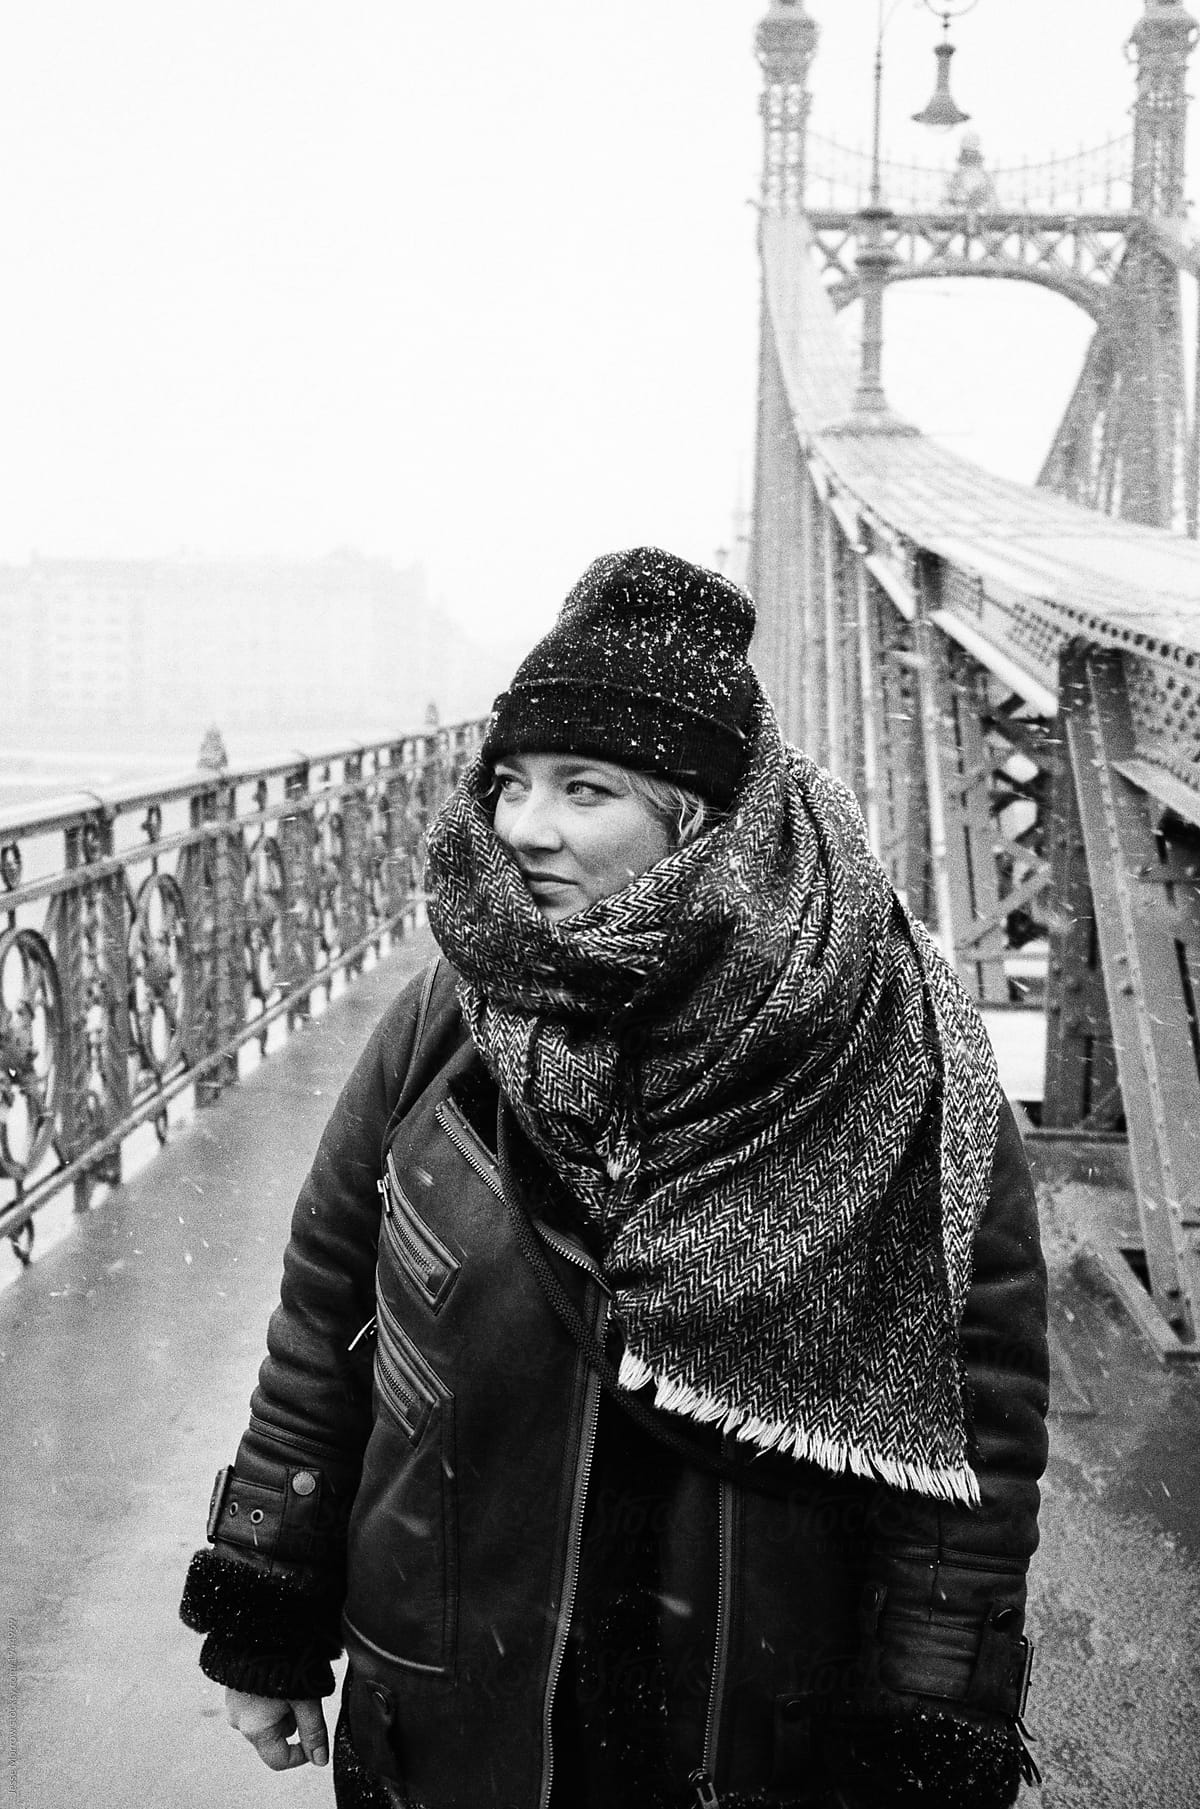 Young female standing in budapest hungary on bridge during snow storm black and white 35mm film